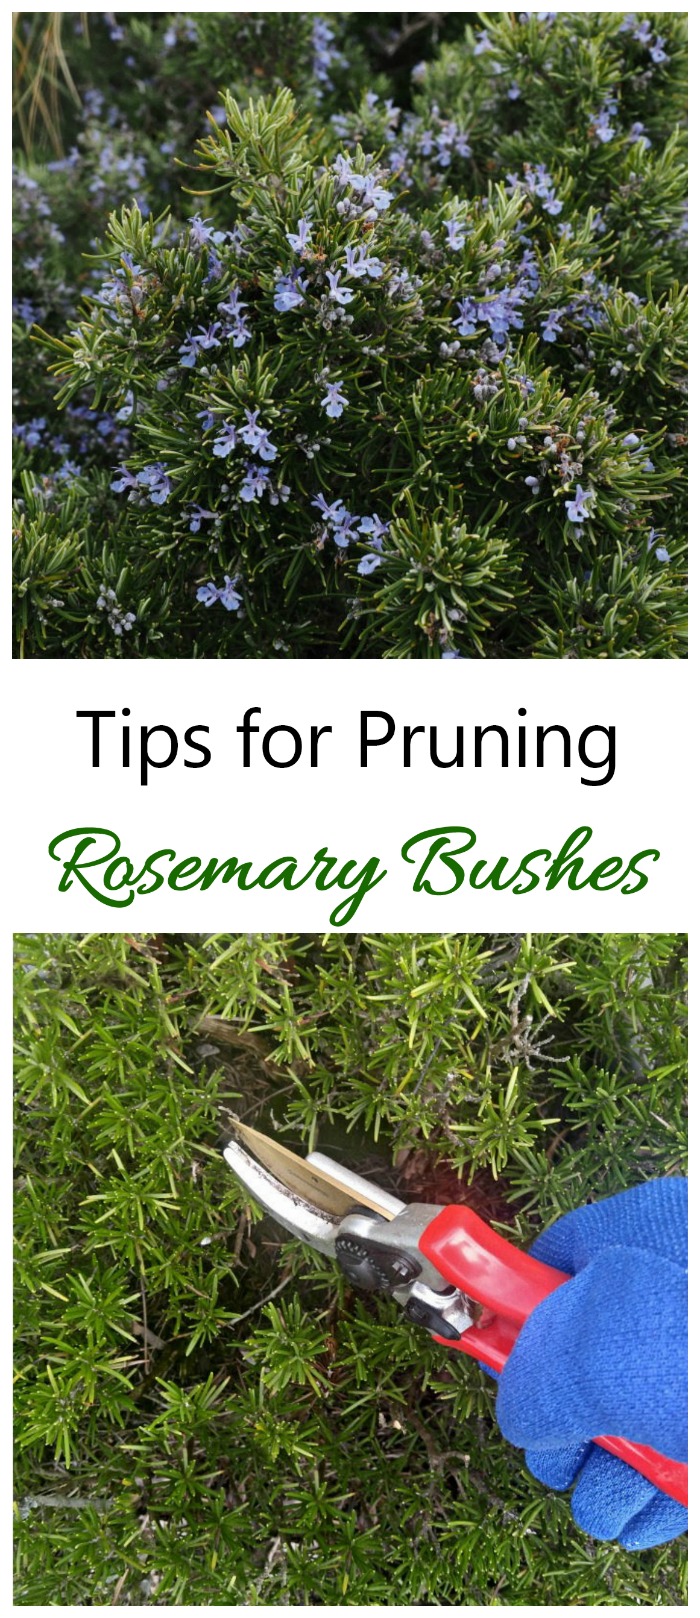 Pruning Rosemary How And When To Prune Rosemary Plants Bushes,Simplicity Rag Quilt Patterns